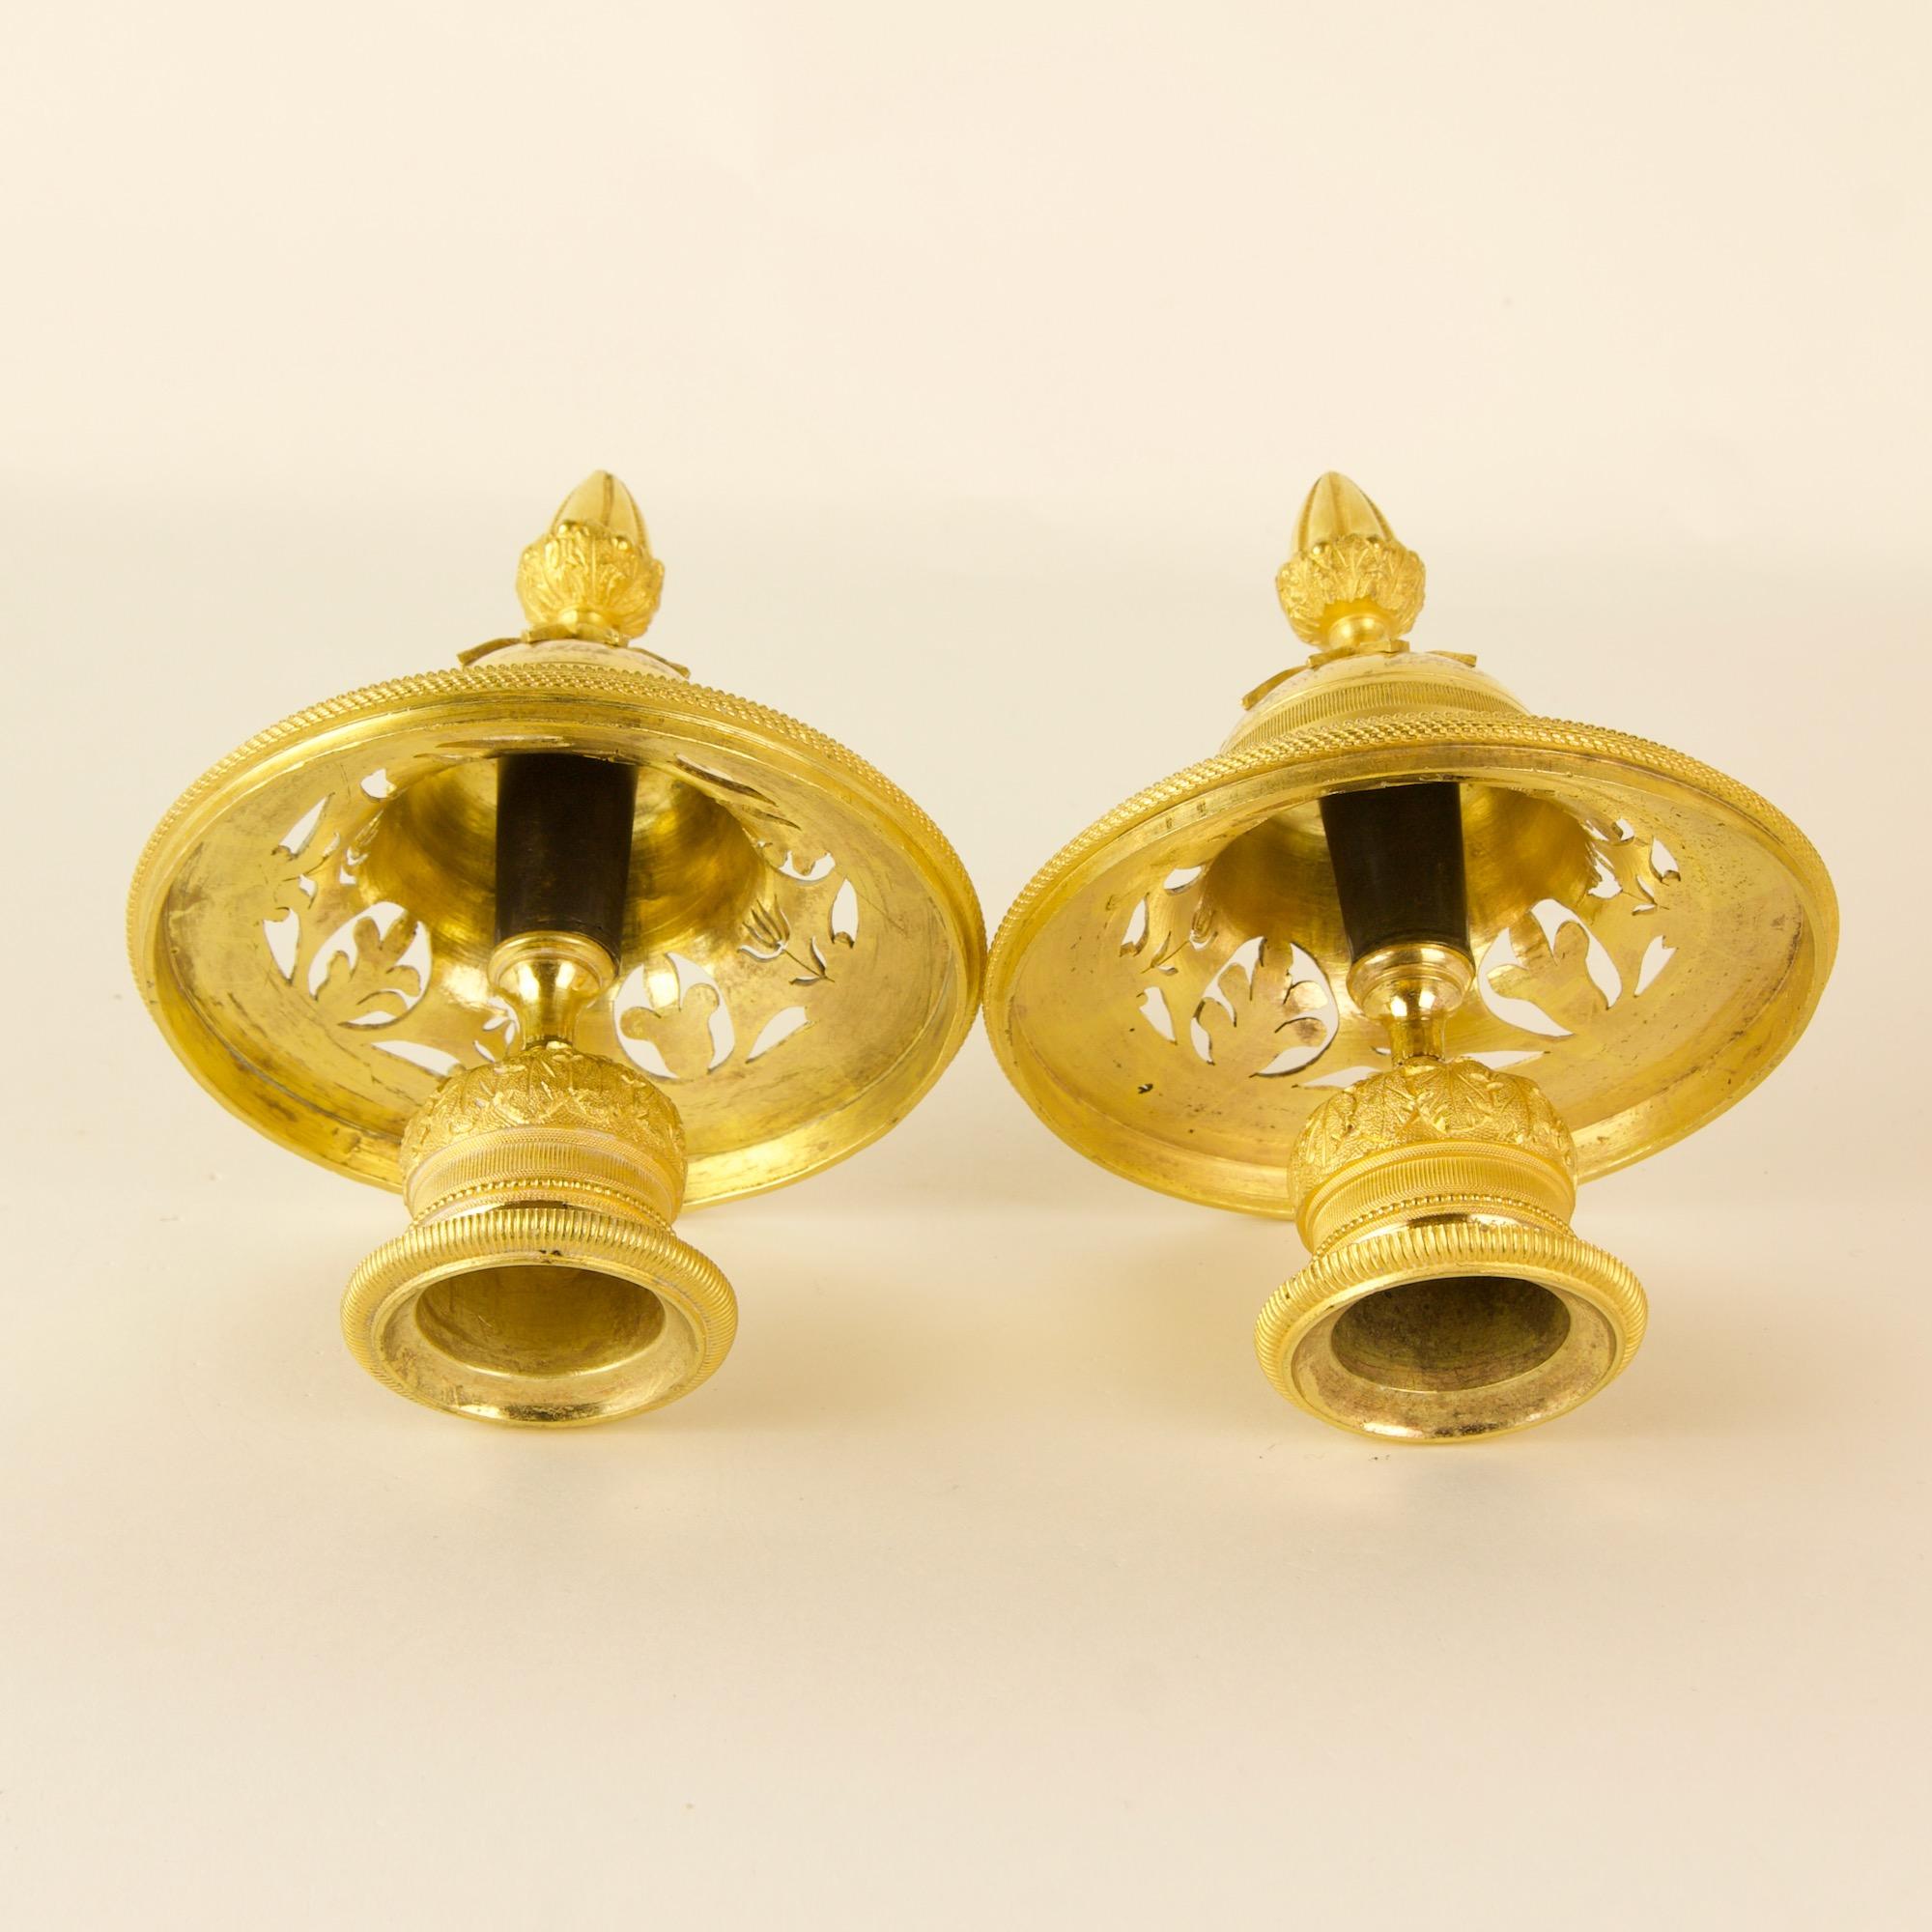 Pair of Early 19th Century French Empire Gilt and Patinated Bronze Cassolettes 15